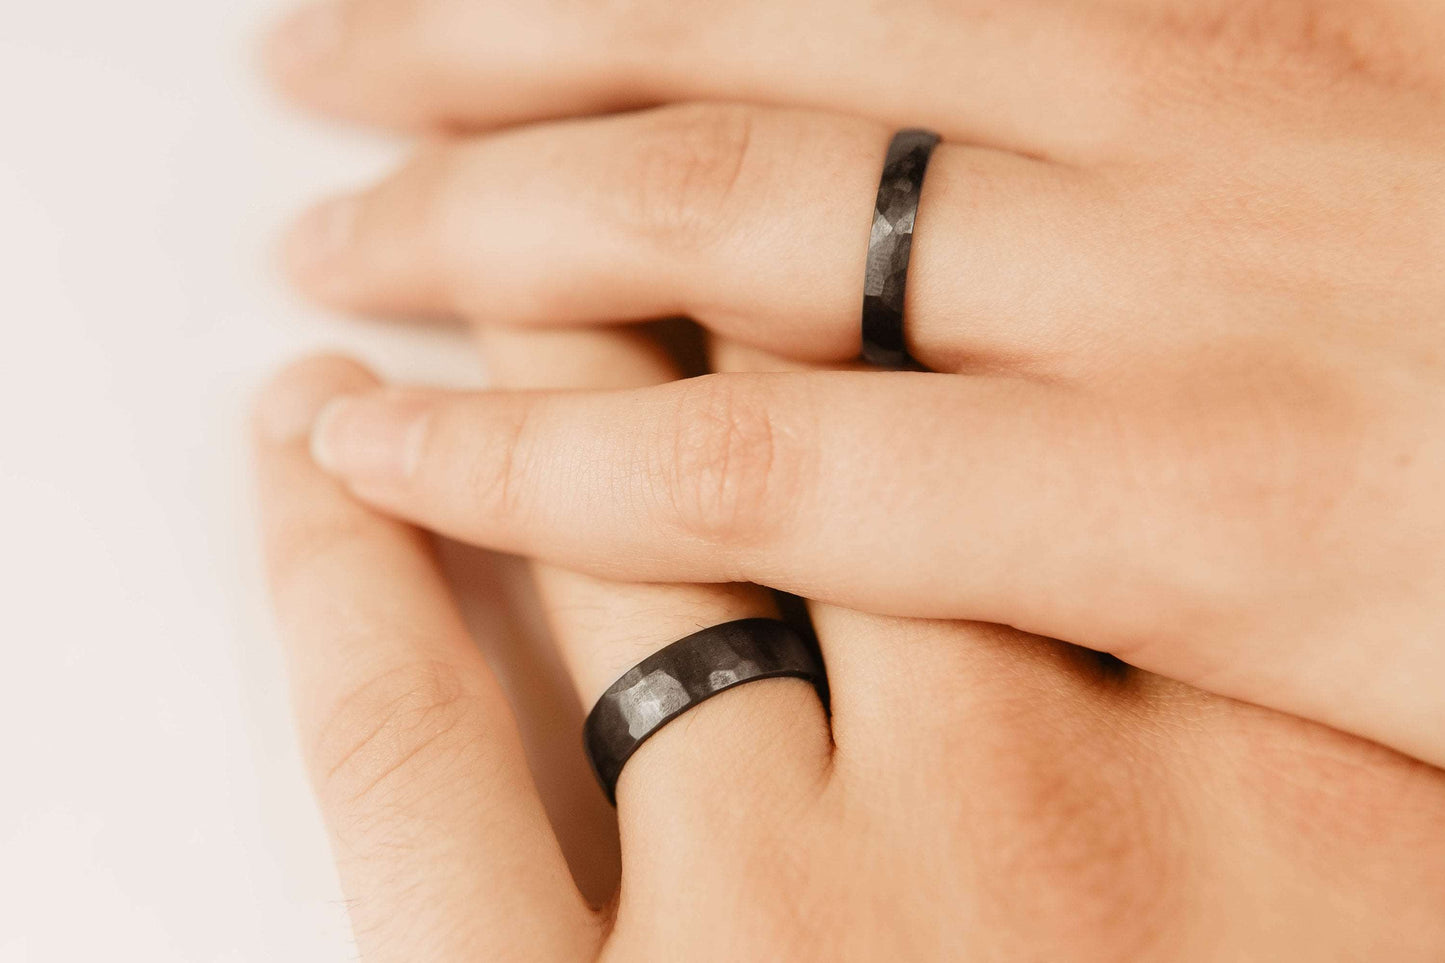 Black Zirconium Wedding Band Set. This photo shows two lightly faceted black zirconium rings. (Shown on hands)